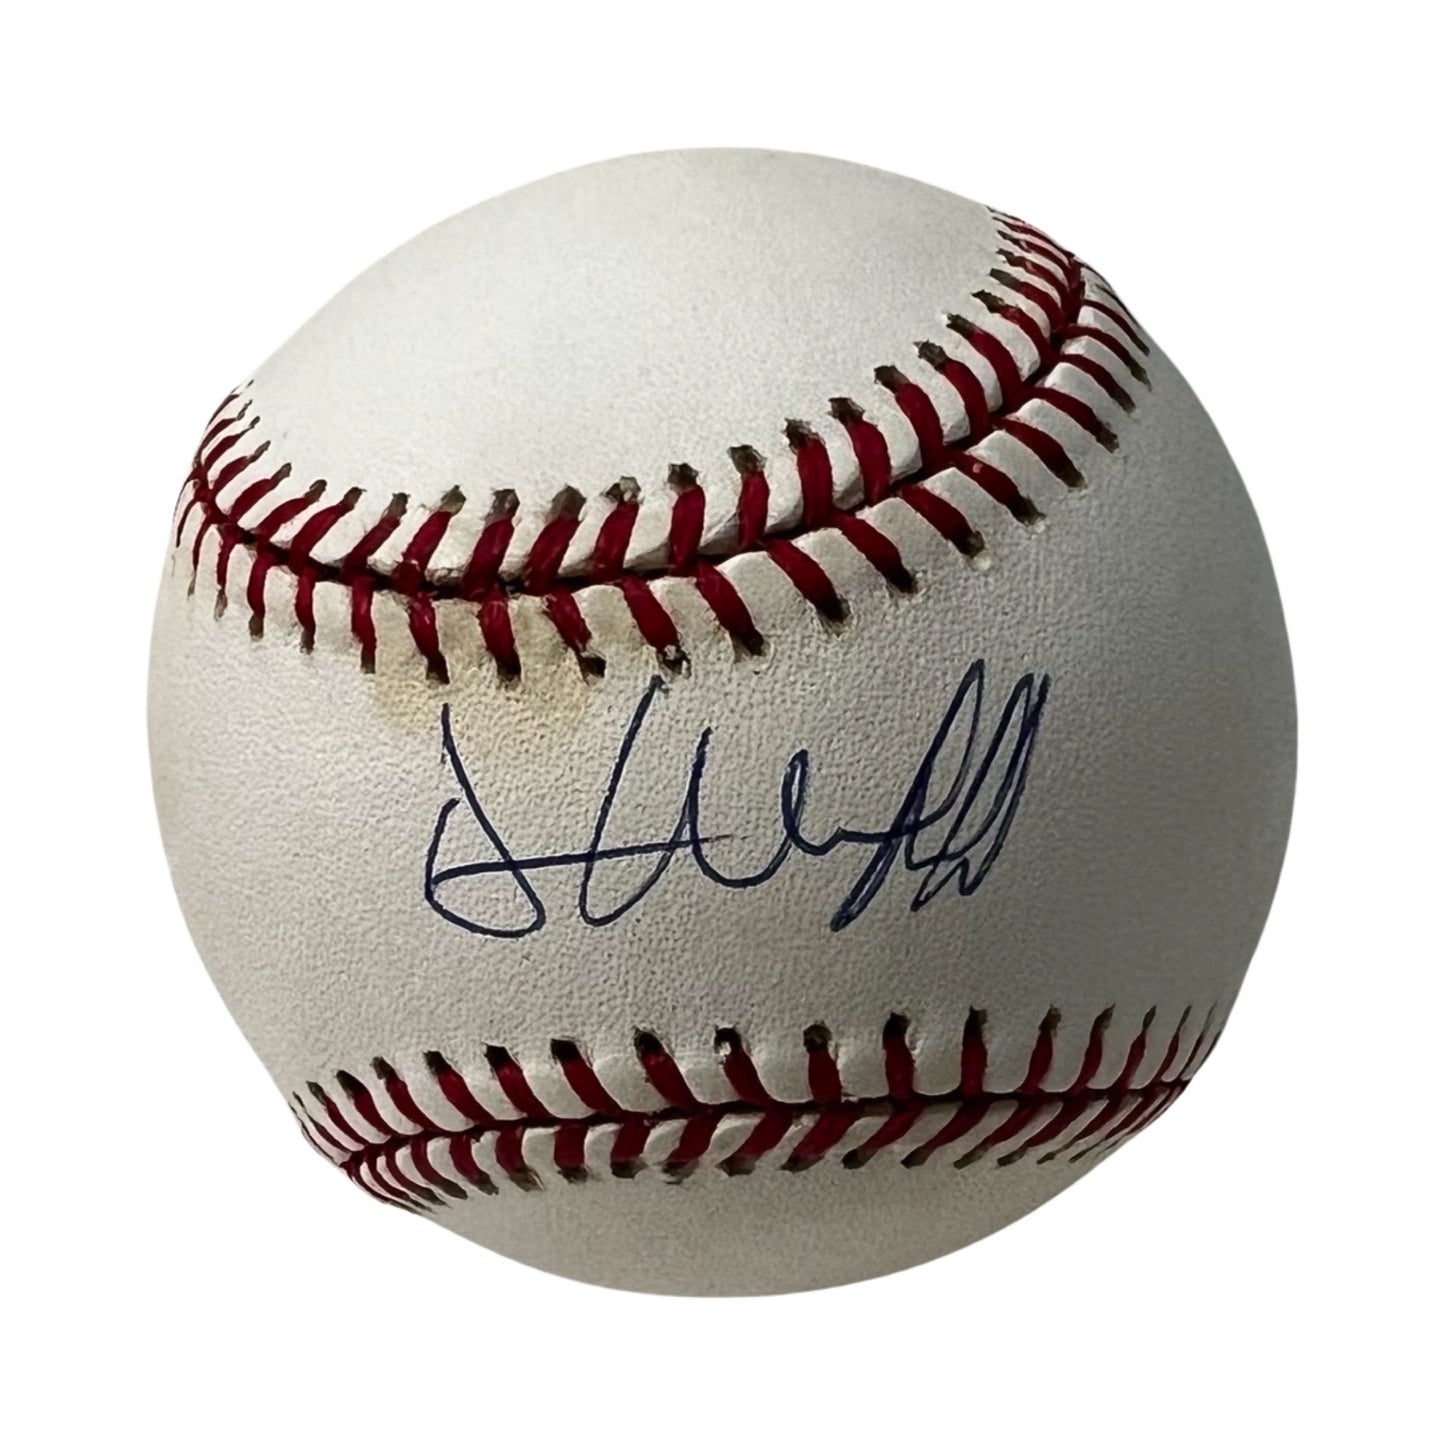 Dave Winfield Autographed Official American League Baseball PSA